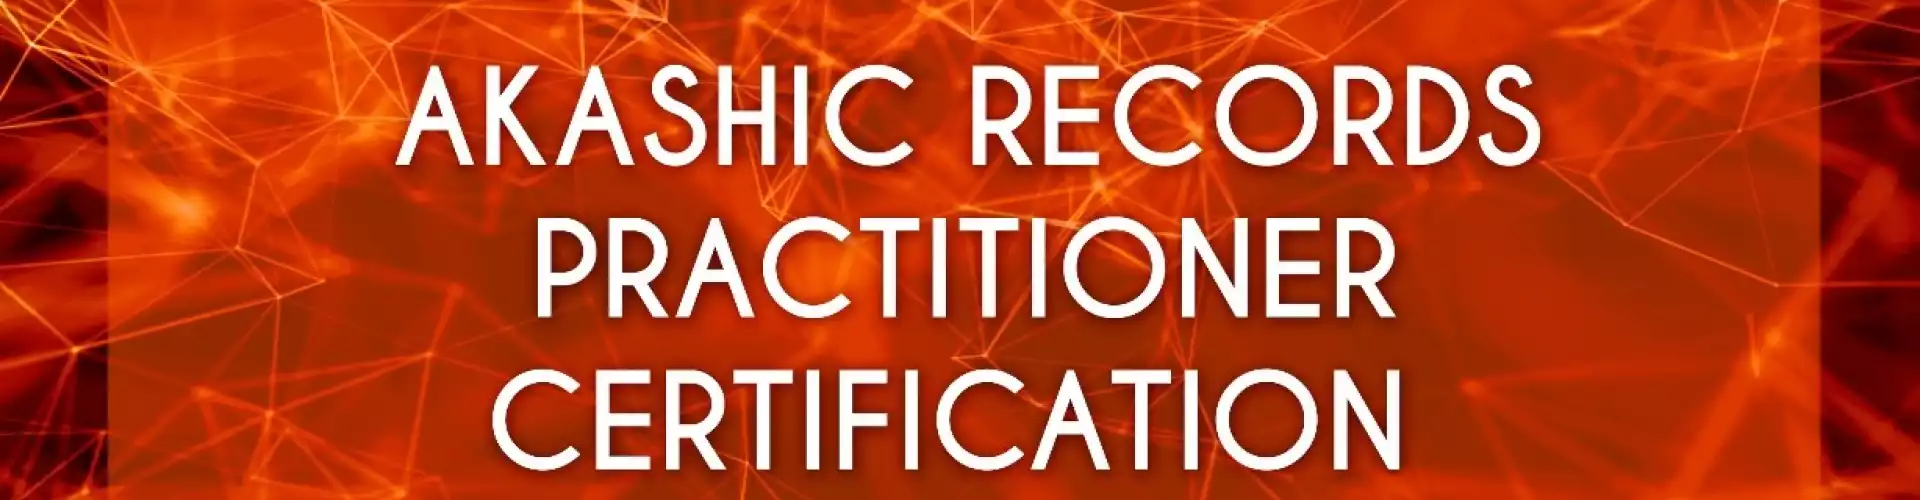  Akashic Records Practitioner Certification